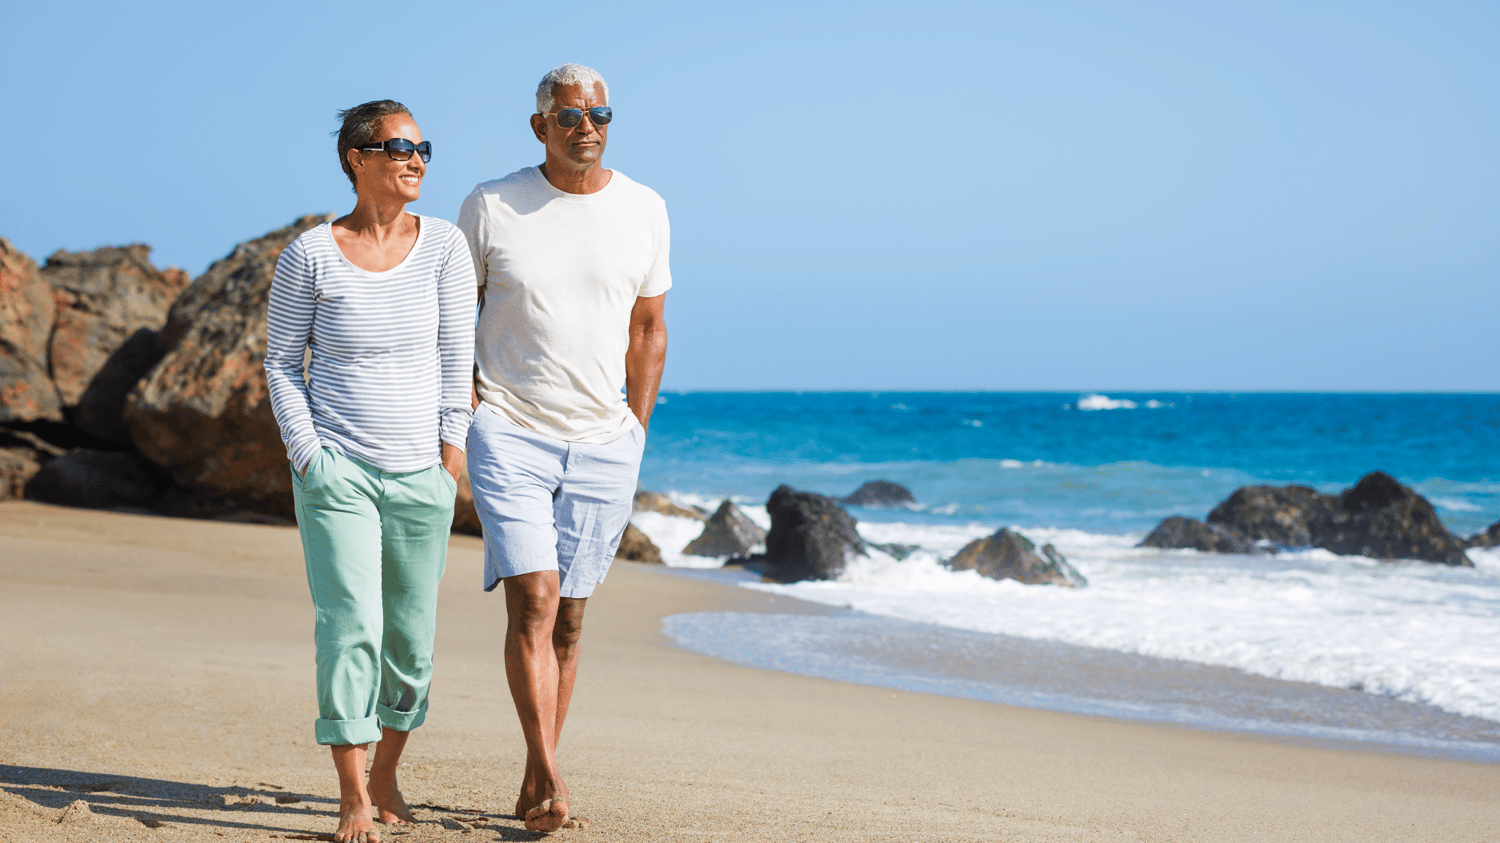 PLANNING YOUR RETIREMENT: HOW MUCH DO YOU REALLY NEED?